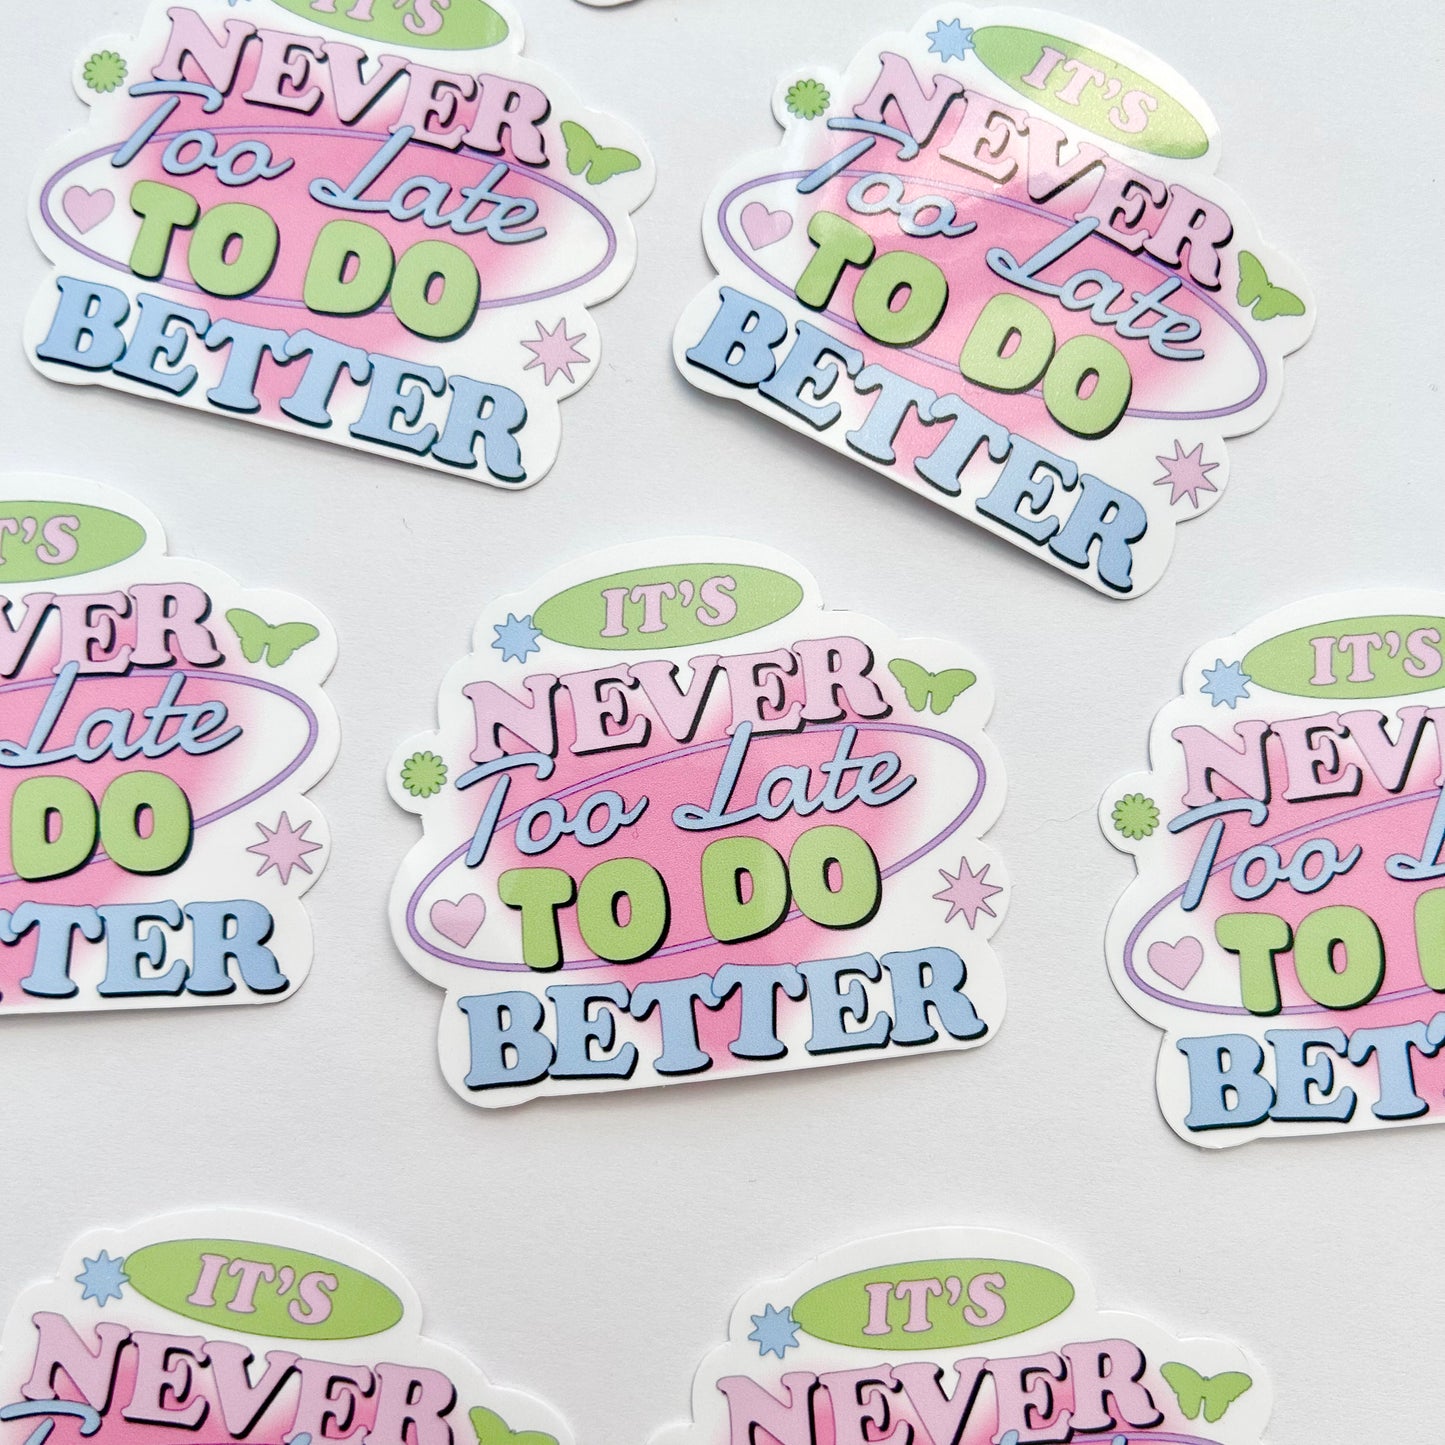 I's Never too Late to Do Better Sticker